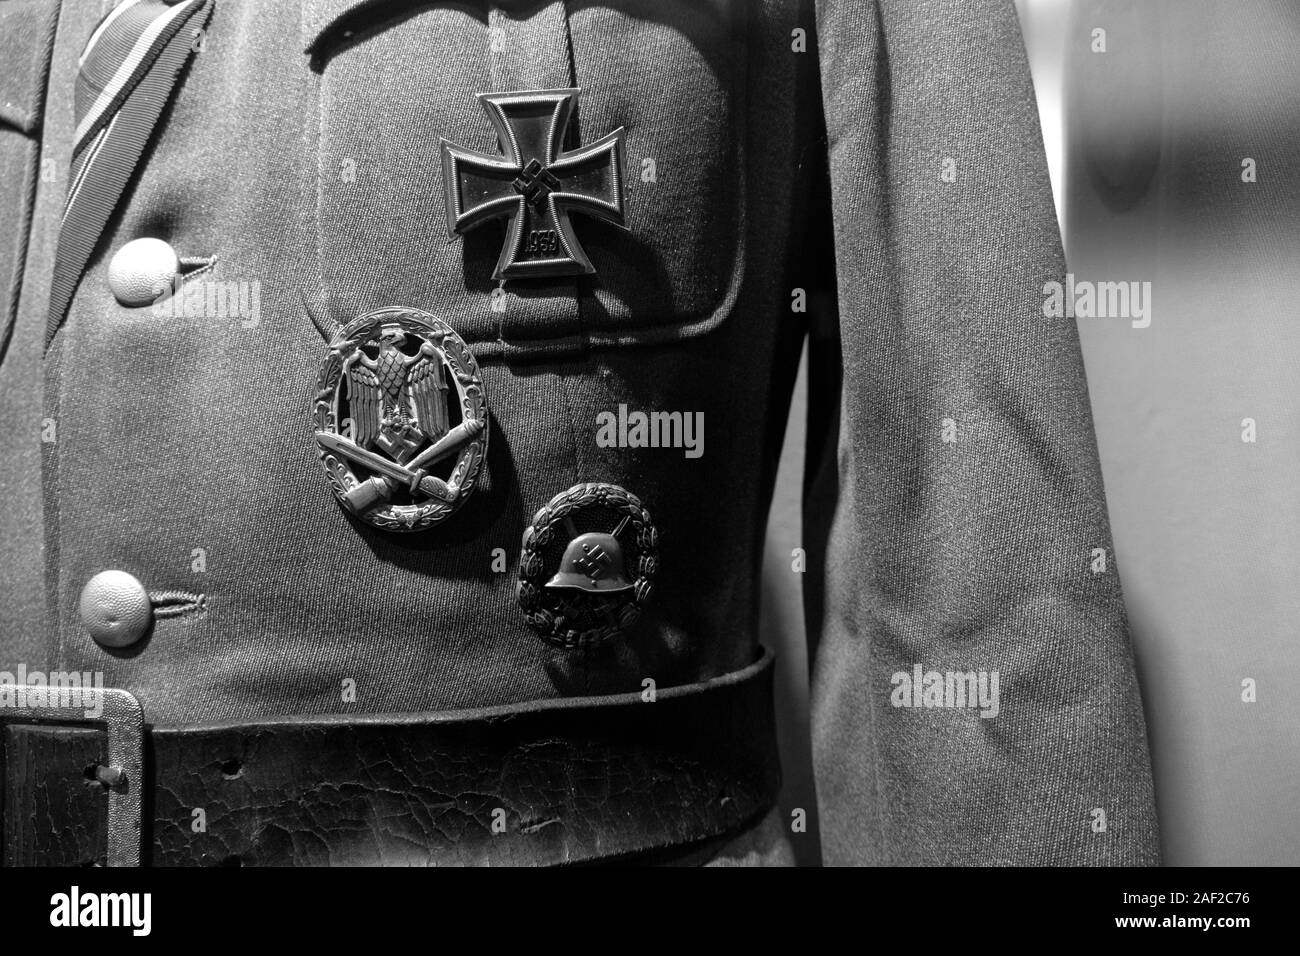 The remains of a Nazi uniform including the Iron Cross medal. Stalag Luft III - Stammlager Luft III near the Polish town of Sagan in Lower Silesia. Th Stock Photo